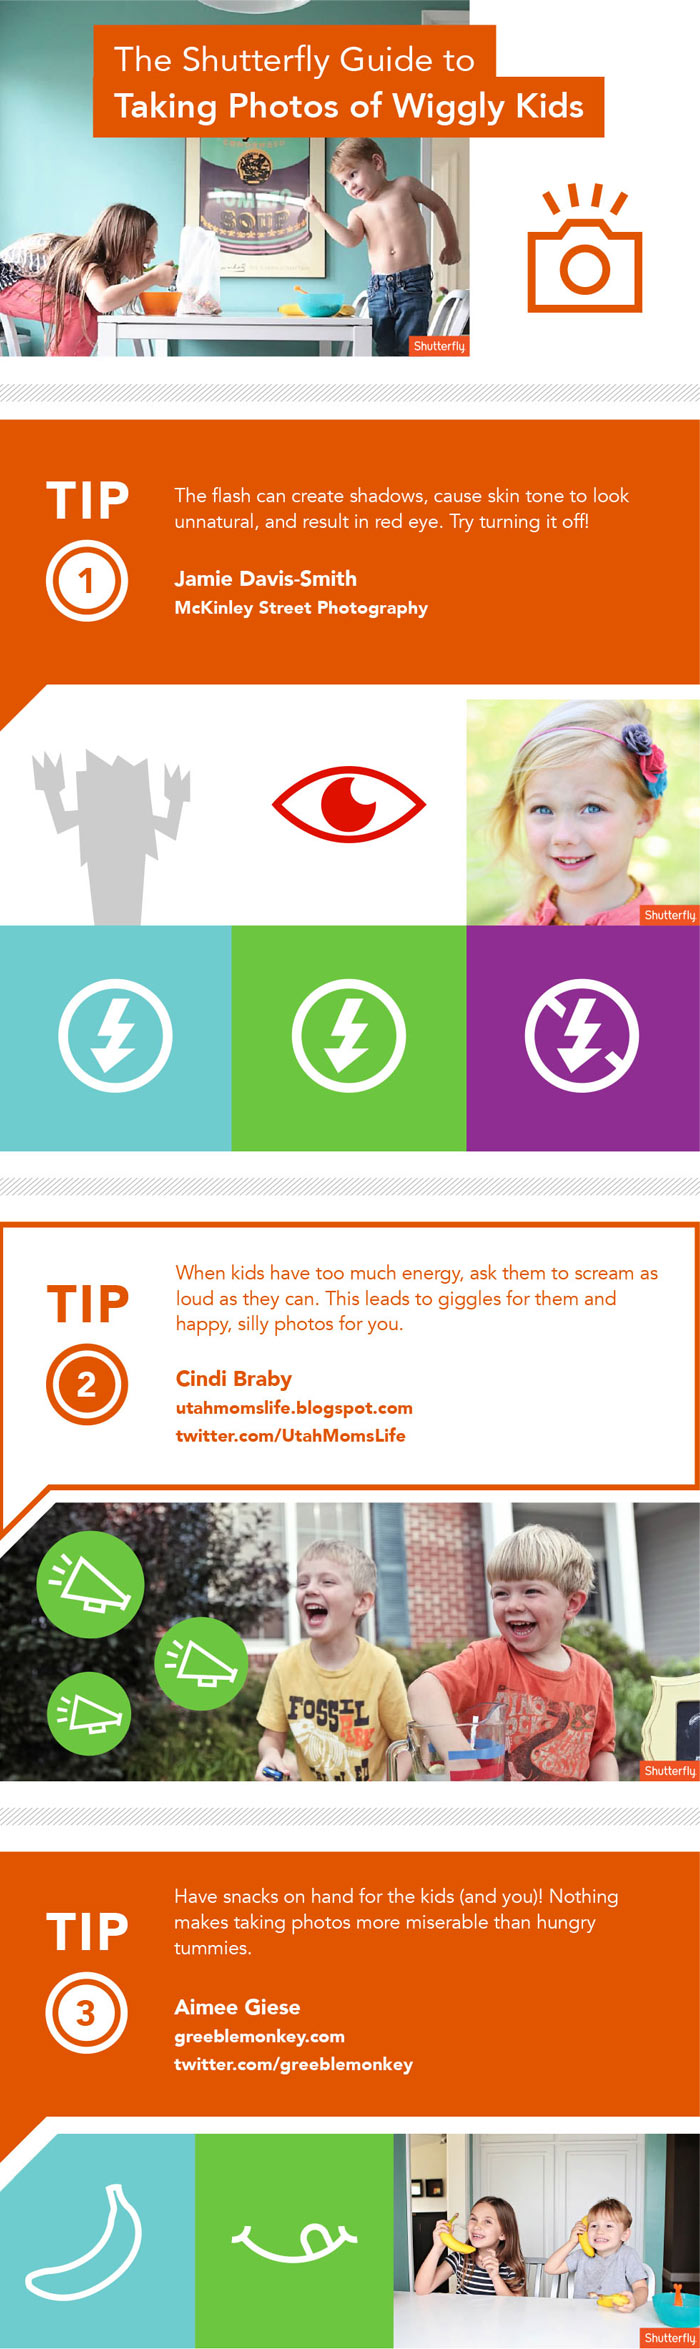 Kids Photography Tips Ingrographic by Shutterfly